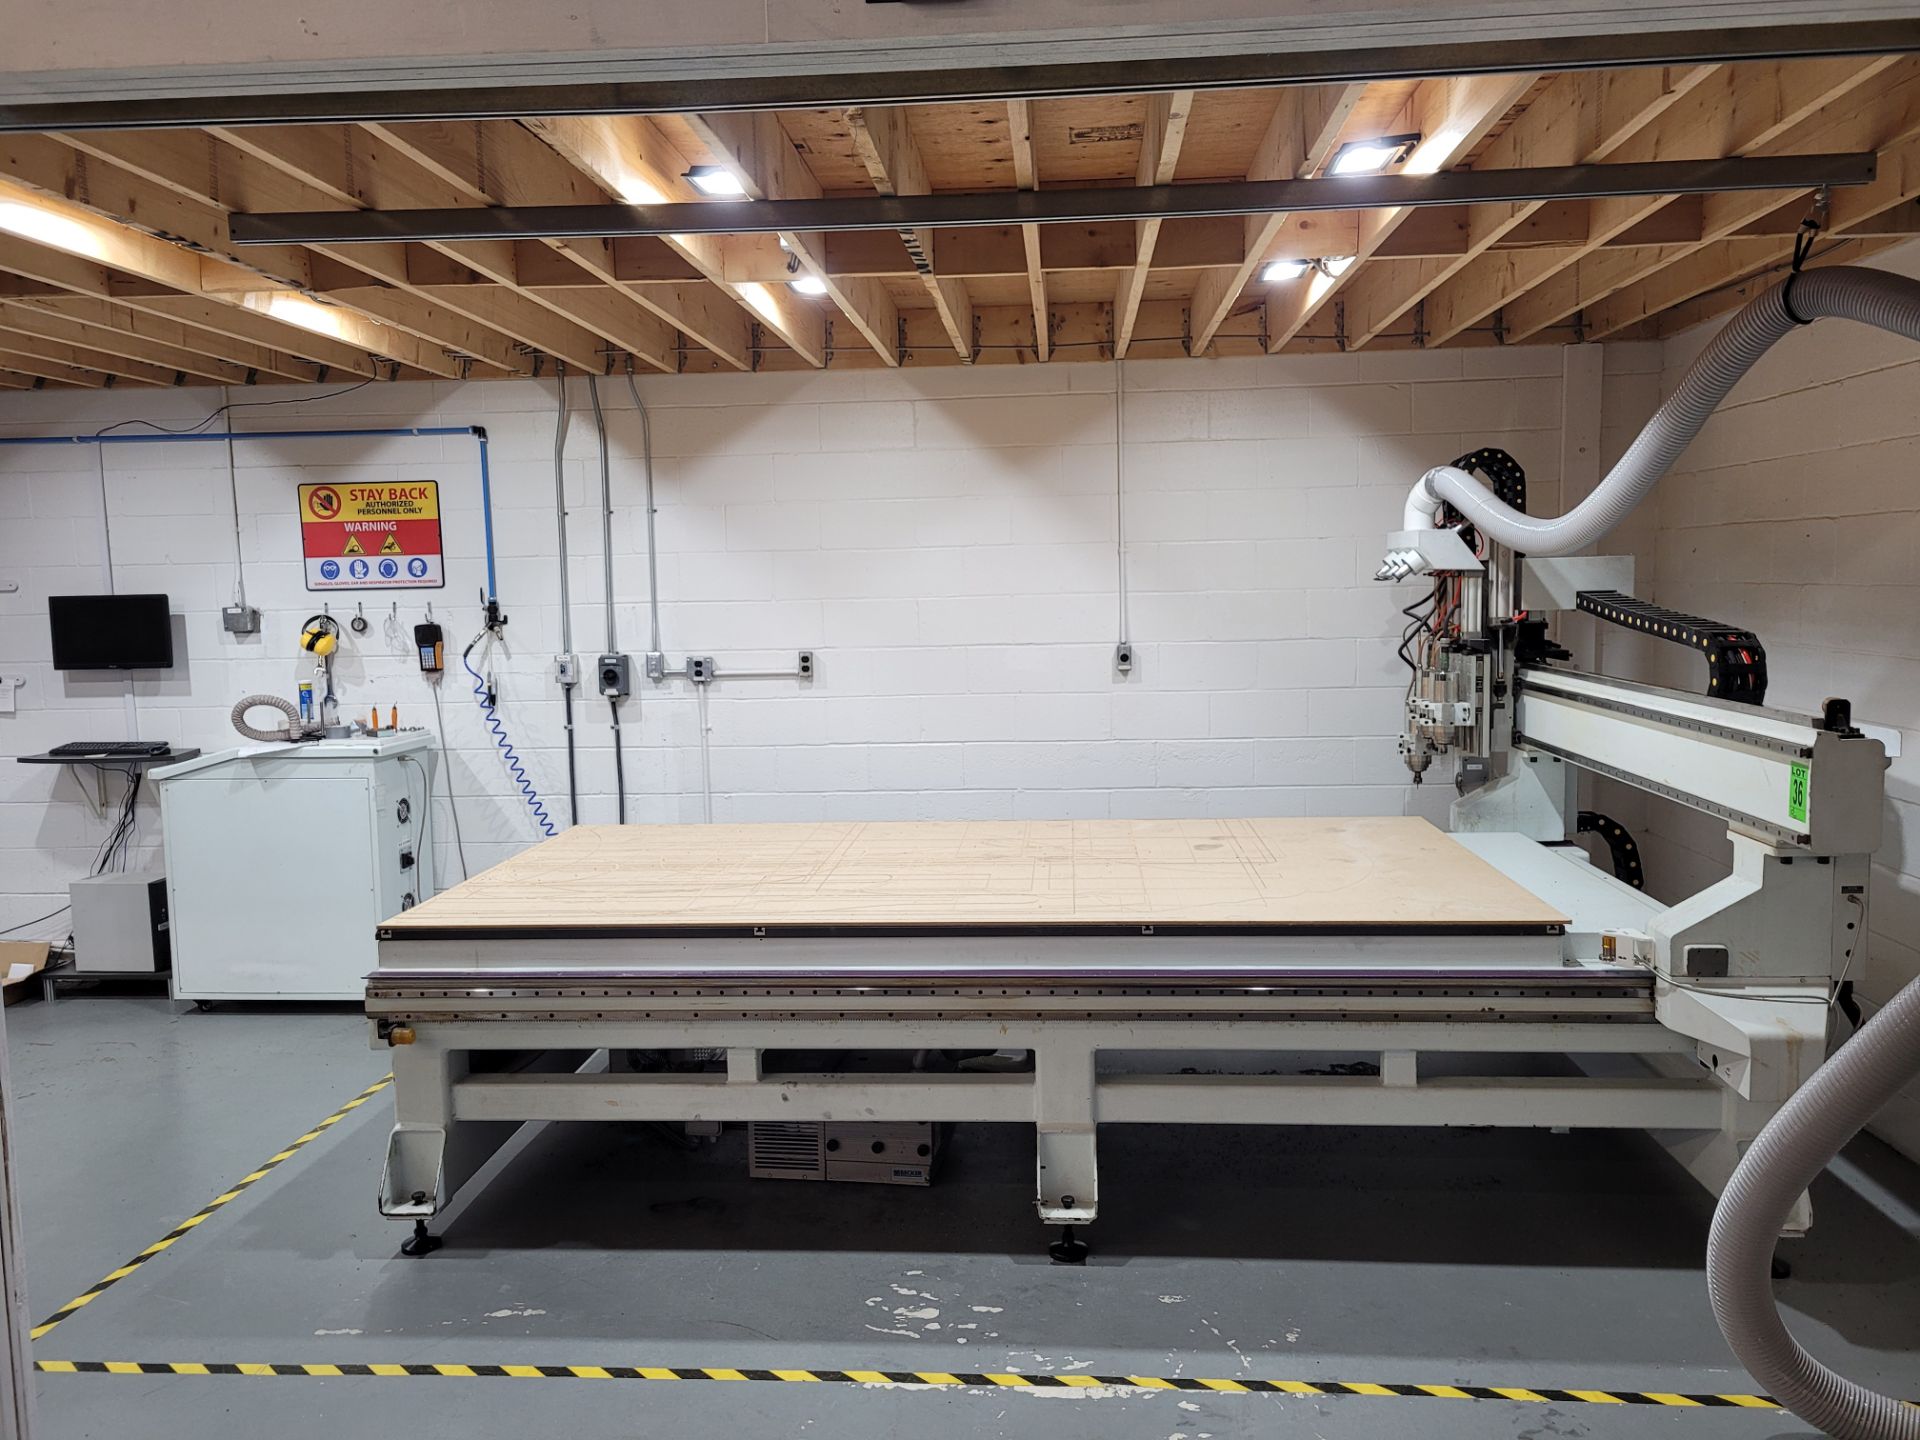 2015 SUDA ATC CNC Router mod. MG1630C, 3-Head System with Accessories and CRAFTEX mod. FM-300 Collec - Image 33 of 51